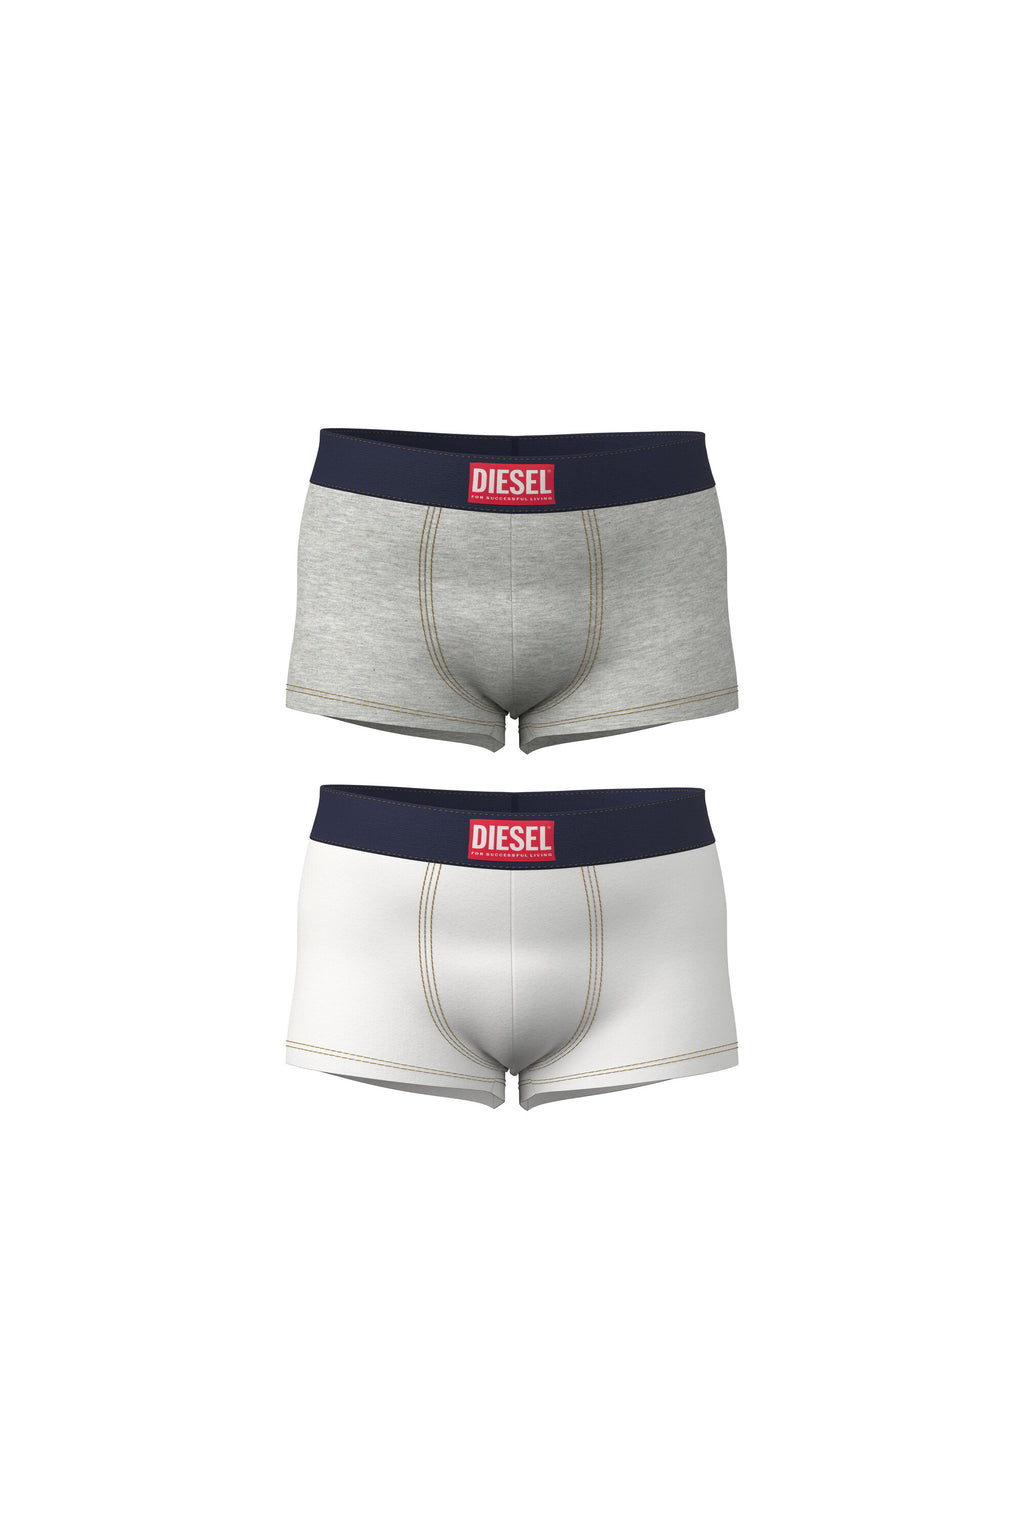 Set 2 boxer shorts with contrasting Diesel logo